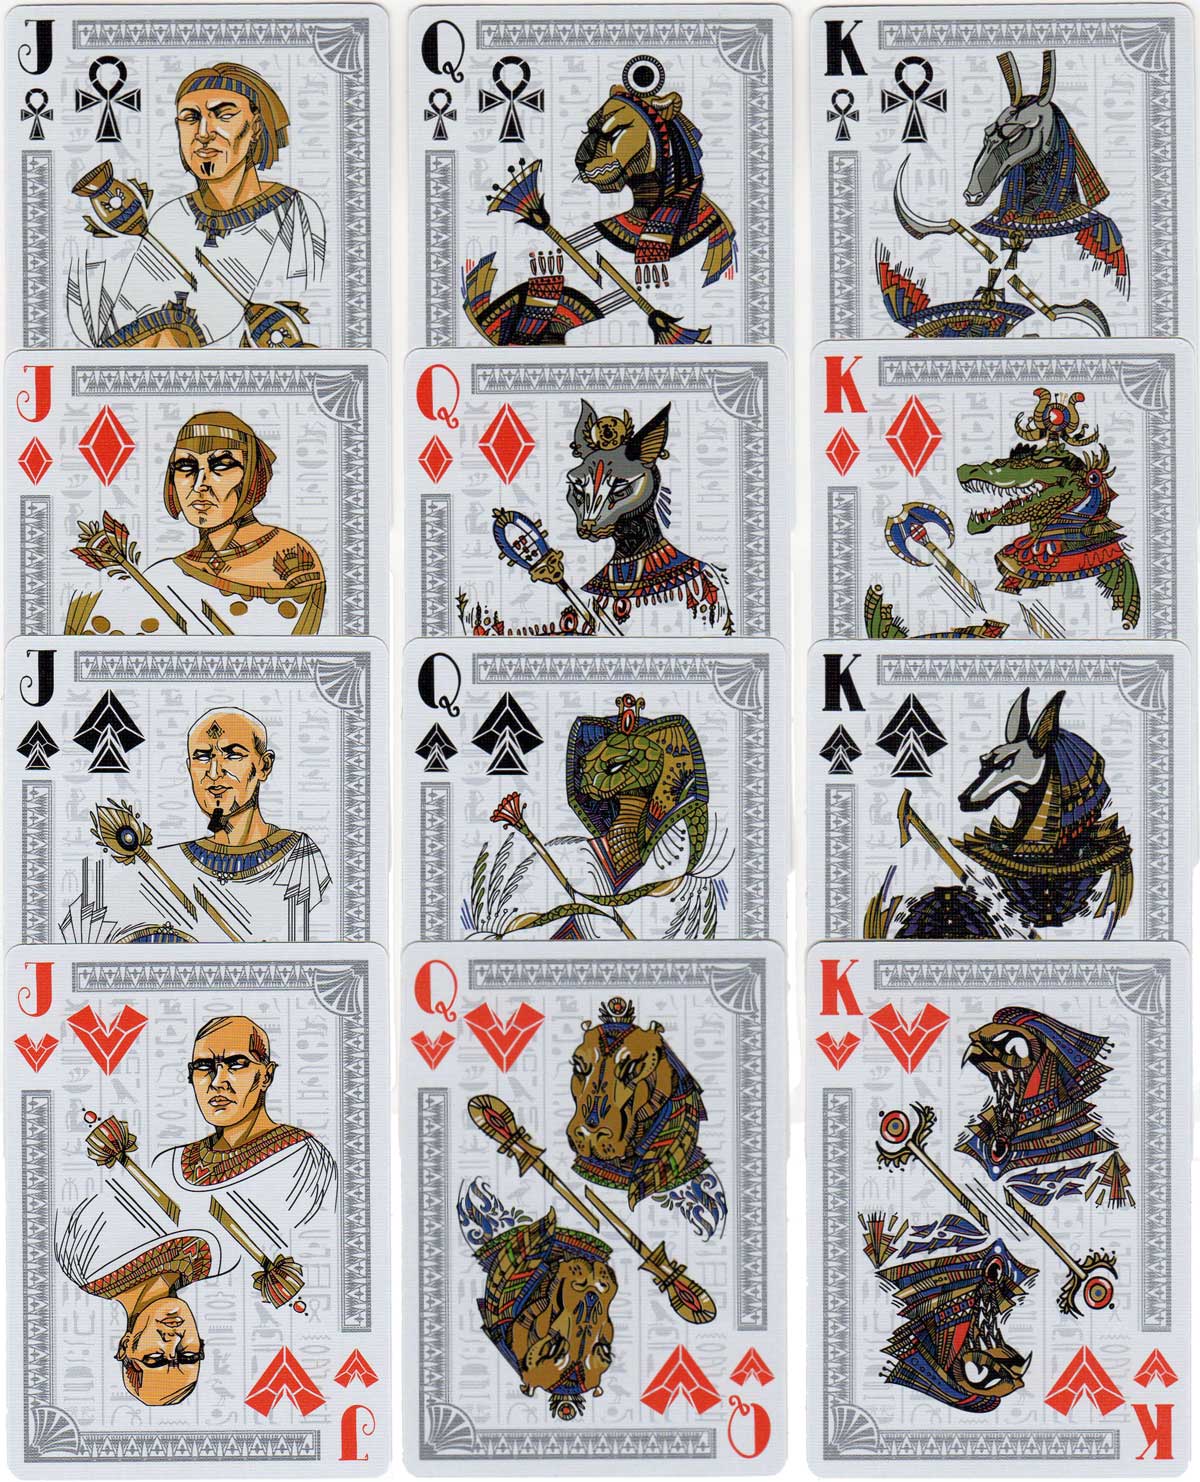 Gods of Egypt playing cards published by SPCC, 2018